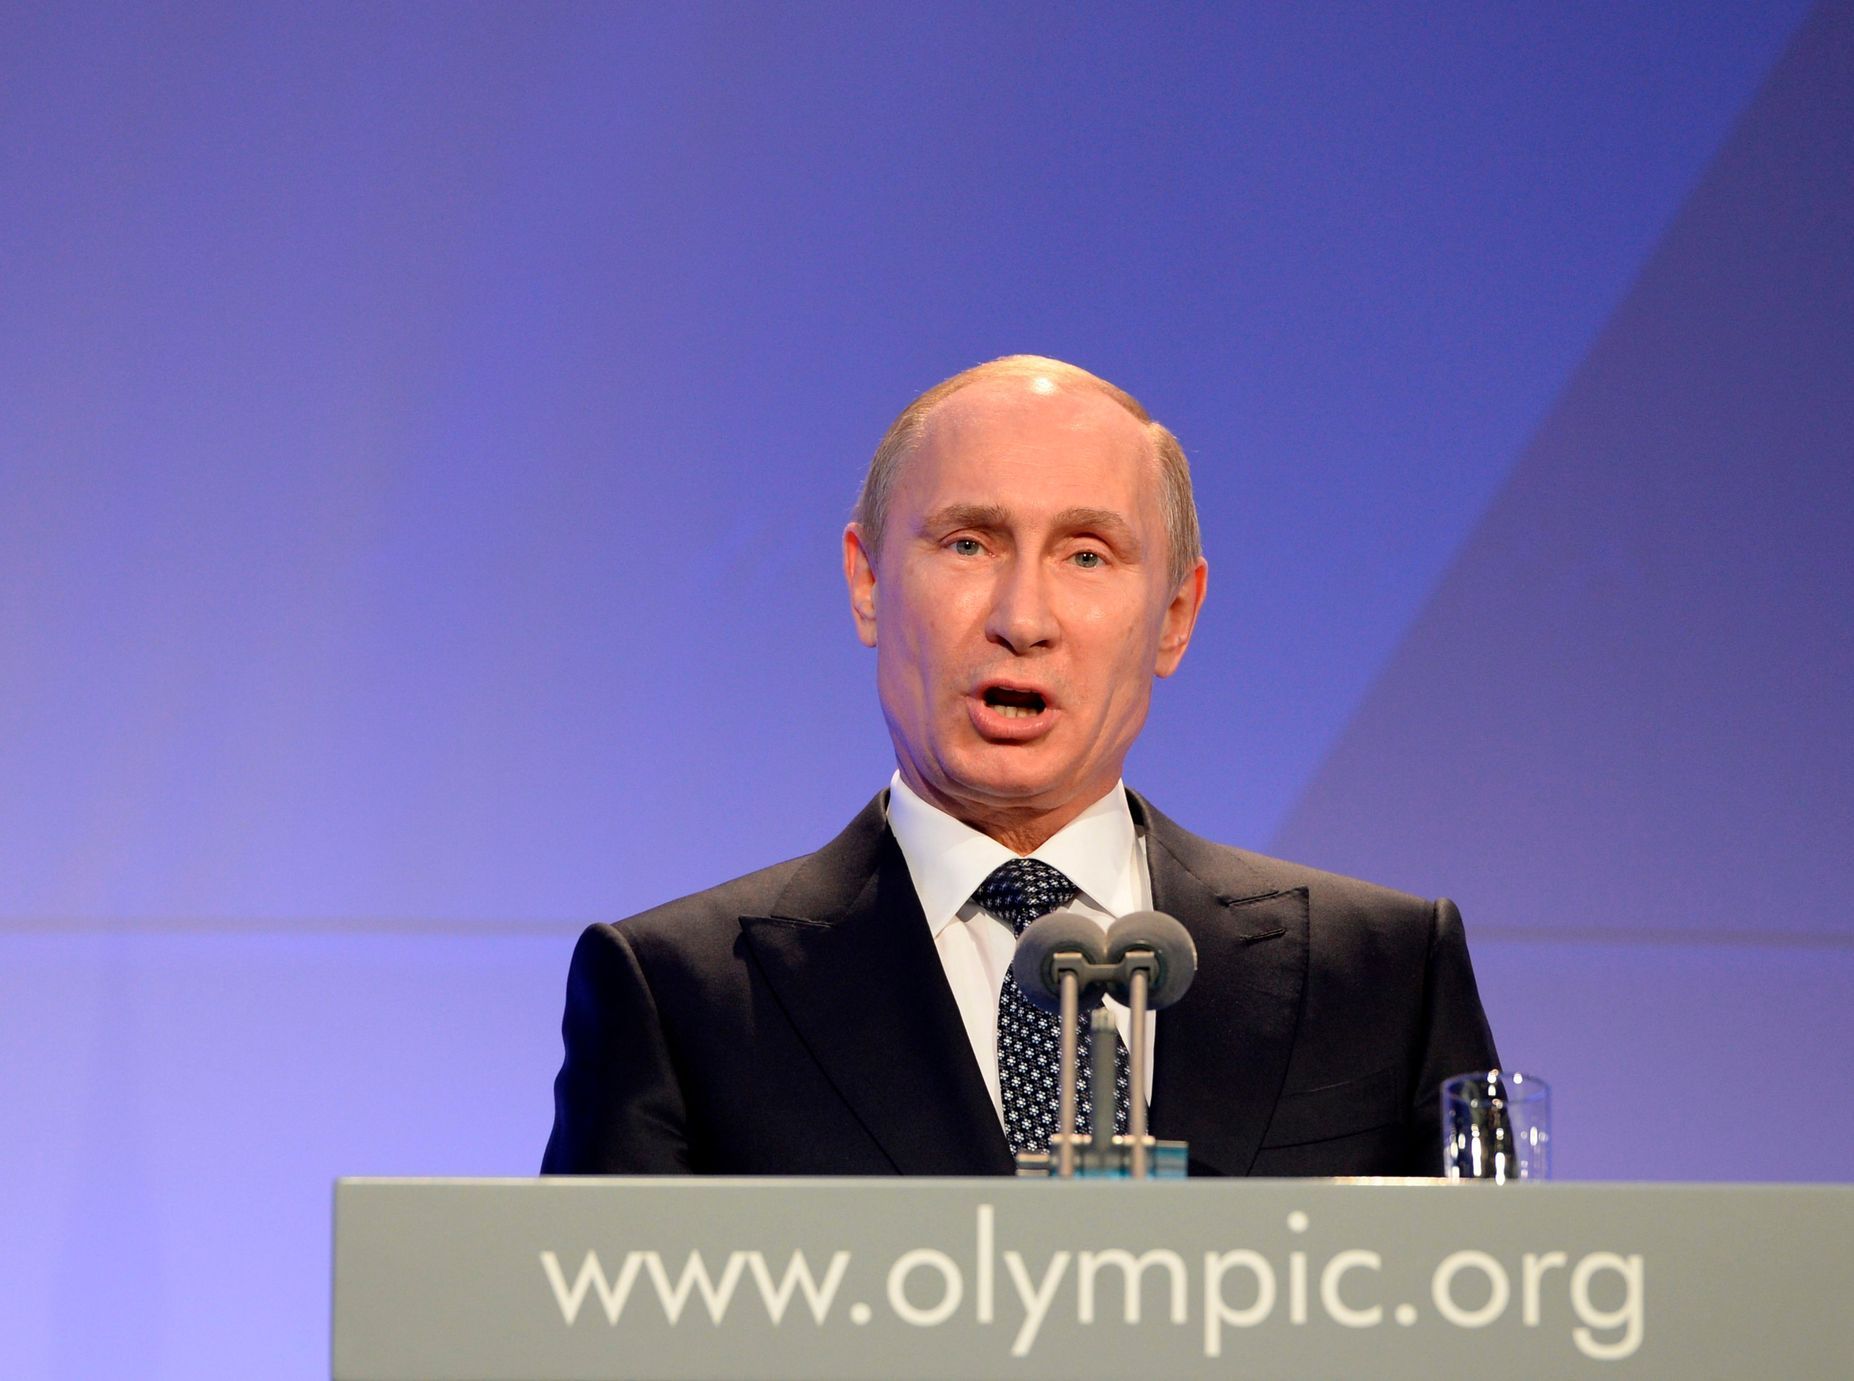 Russian President Putin delivers his speech at the International Olympic Committee Gala Dinner at the 2014 Sochi Winter Olympics